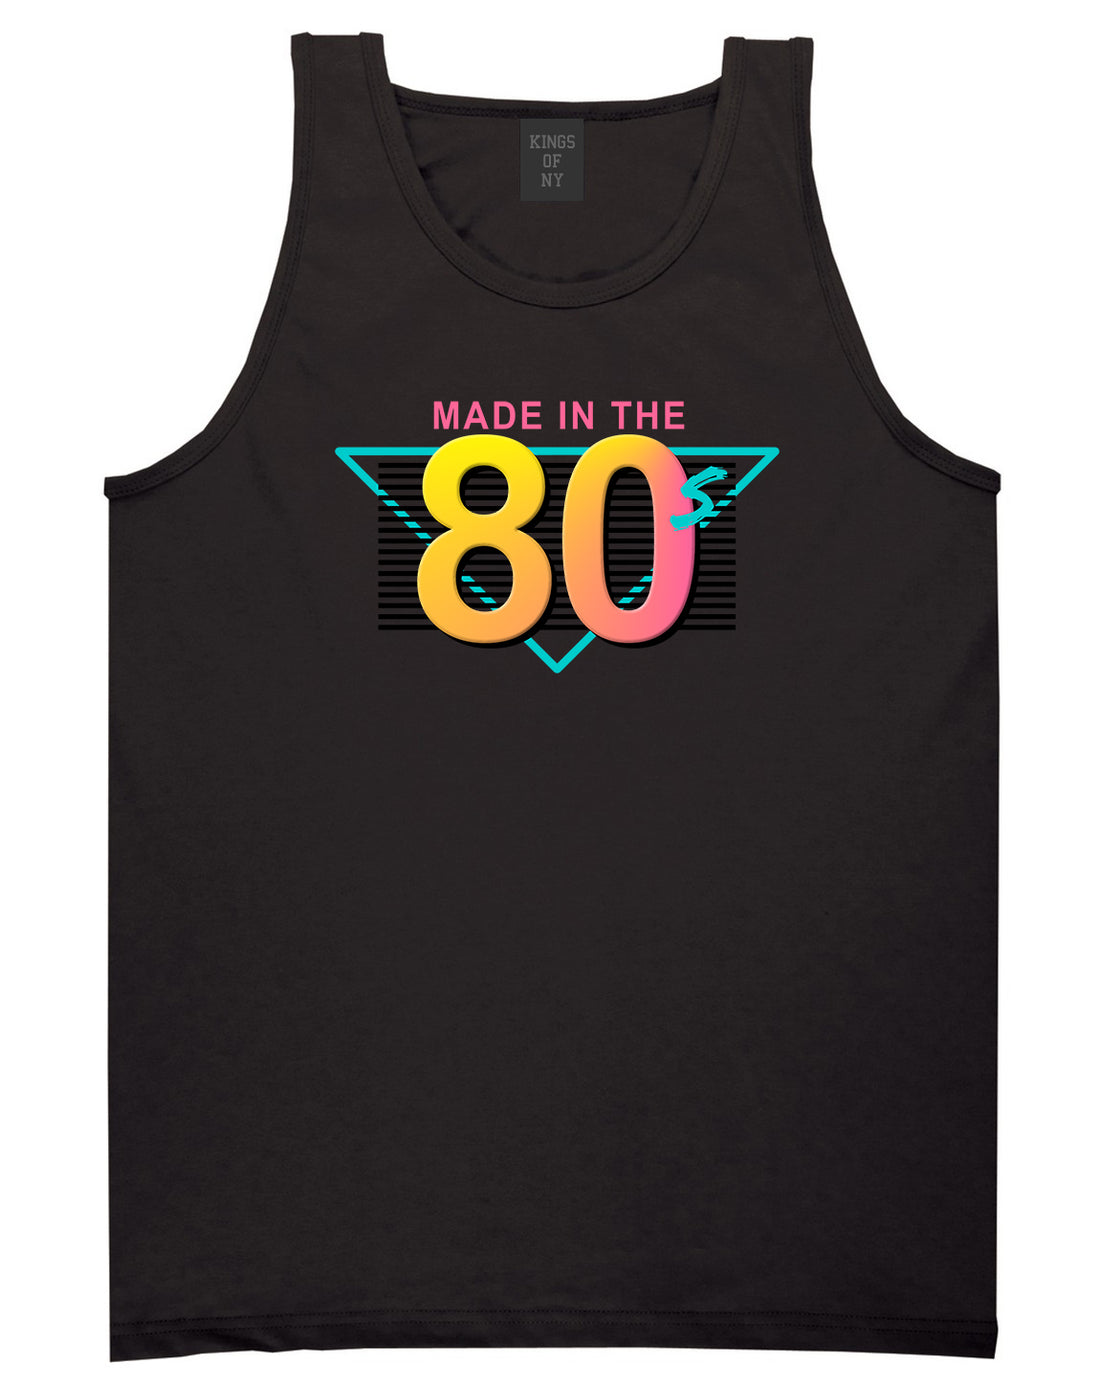 Made In The 80s Retro Mens Tank Top Shirt Black by Kings Of NY